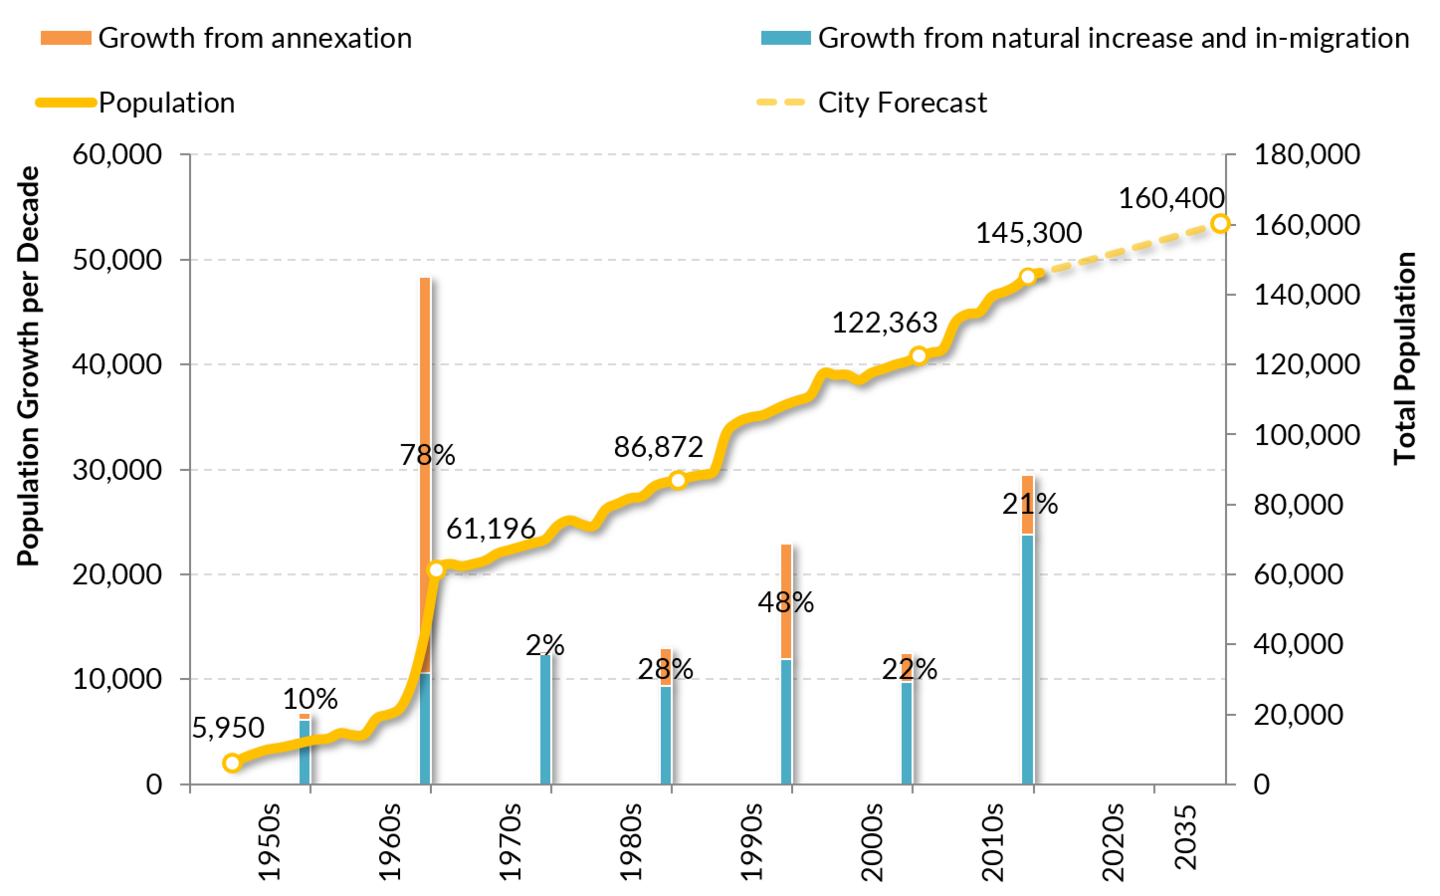 Population Growth Since 1953 Showing Growth Due to Annexation